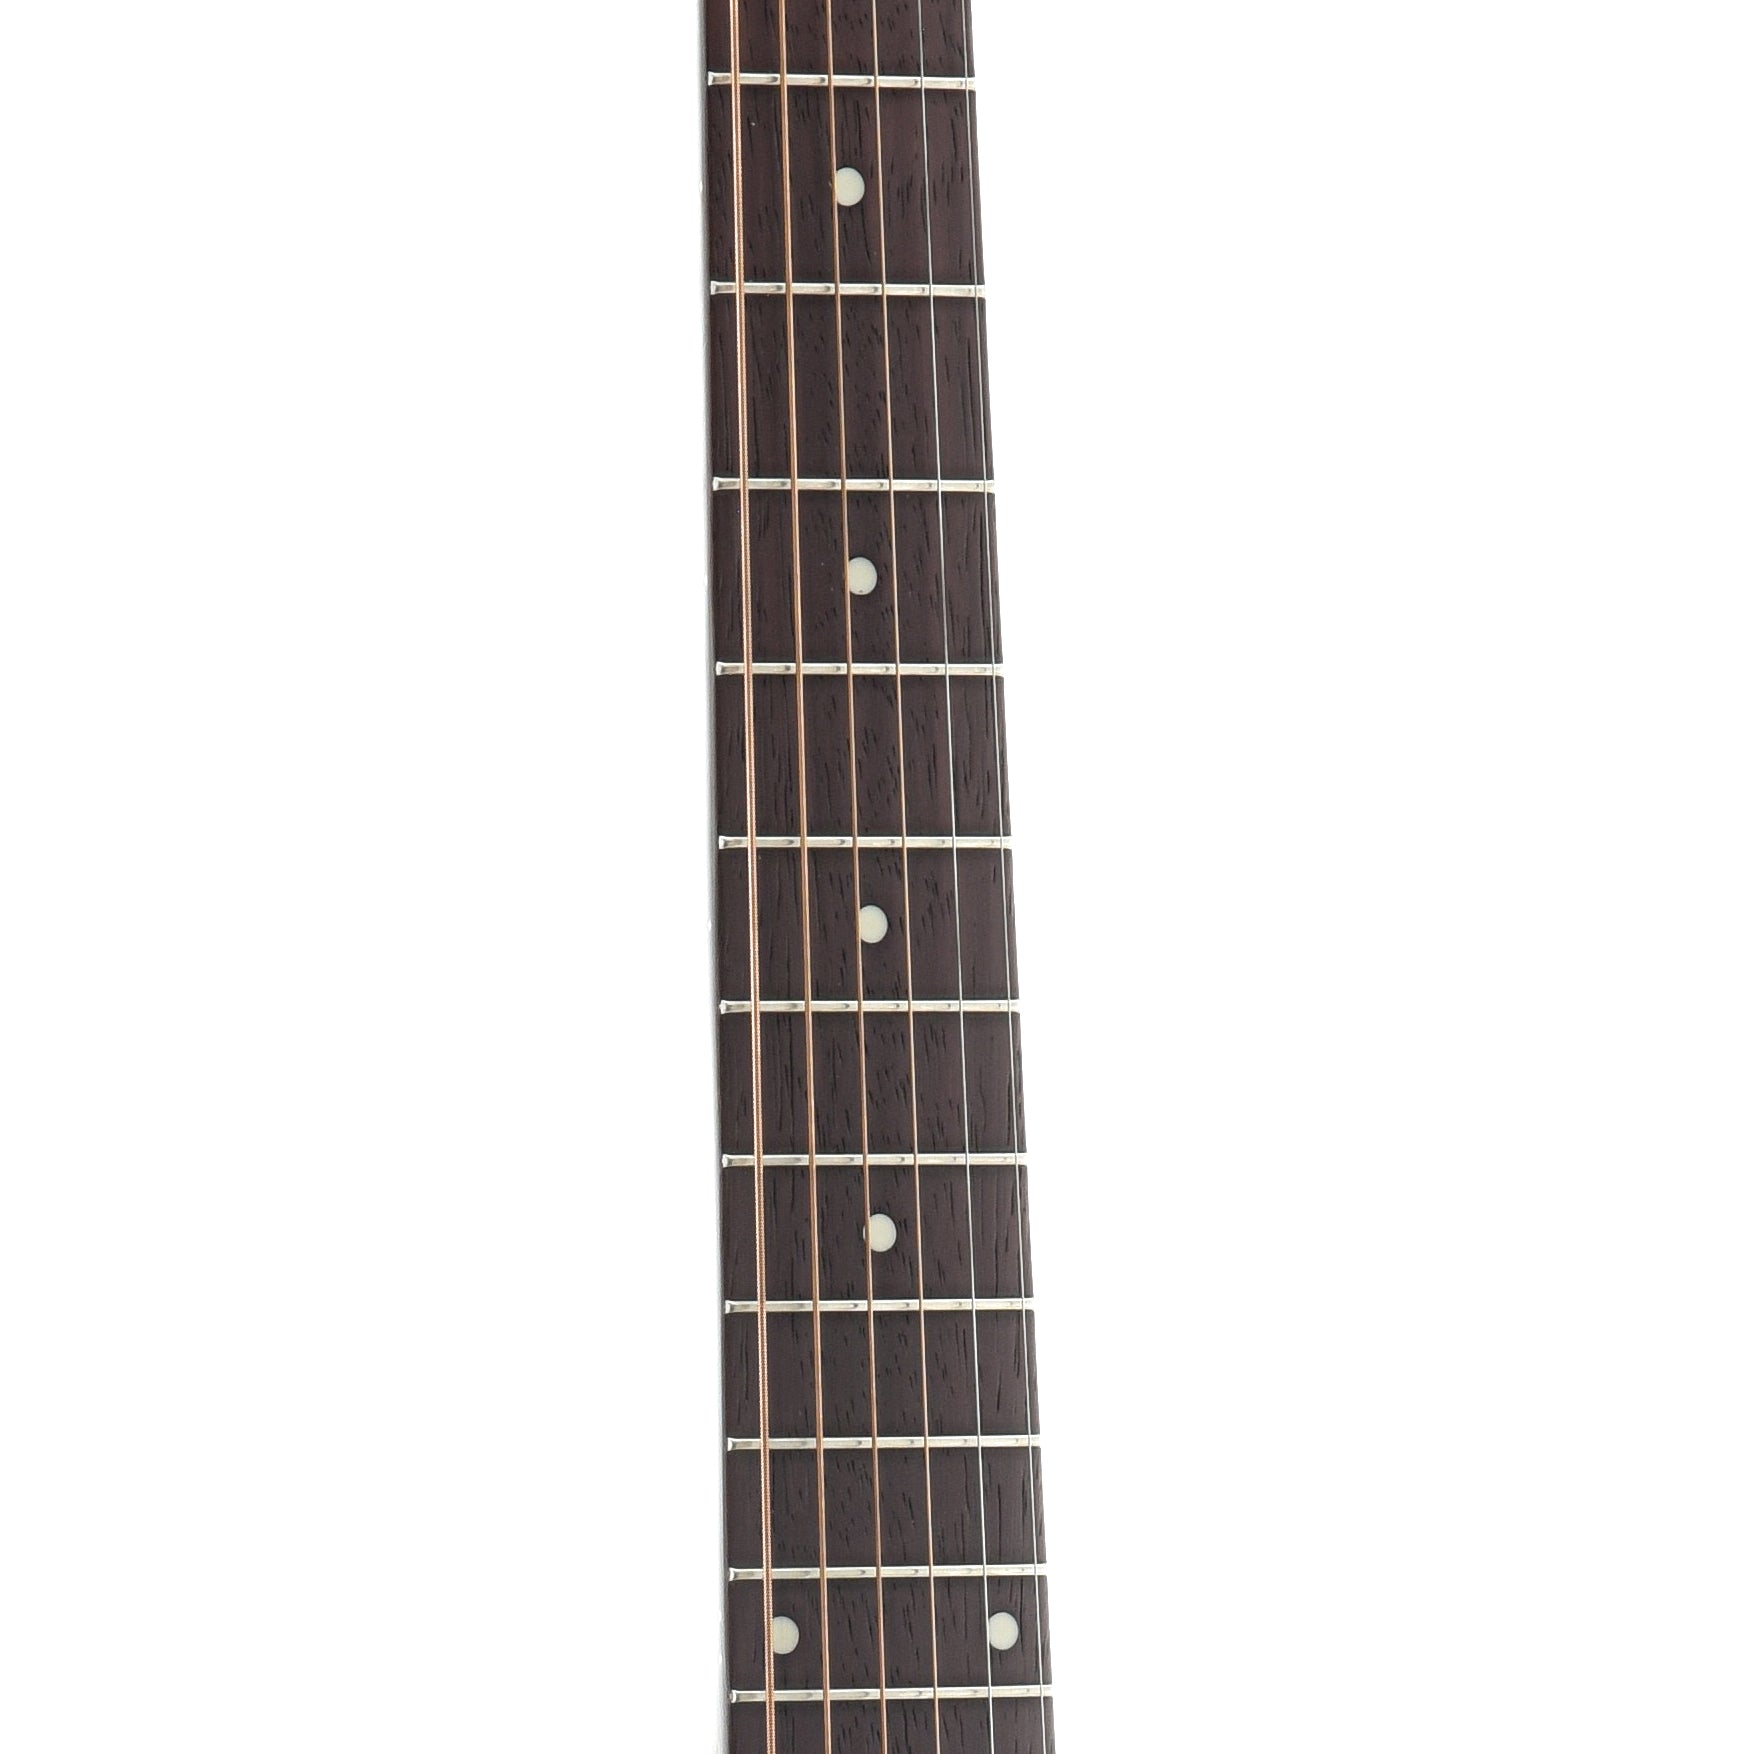 Fretboard of Recording King Series 11 All Solid 000 Acoustic Guitar